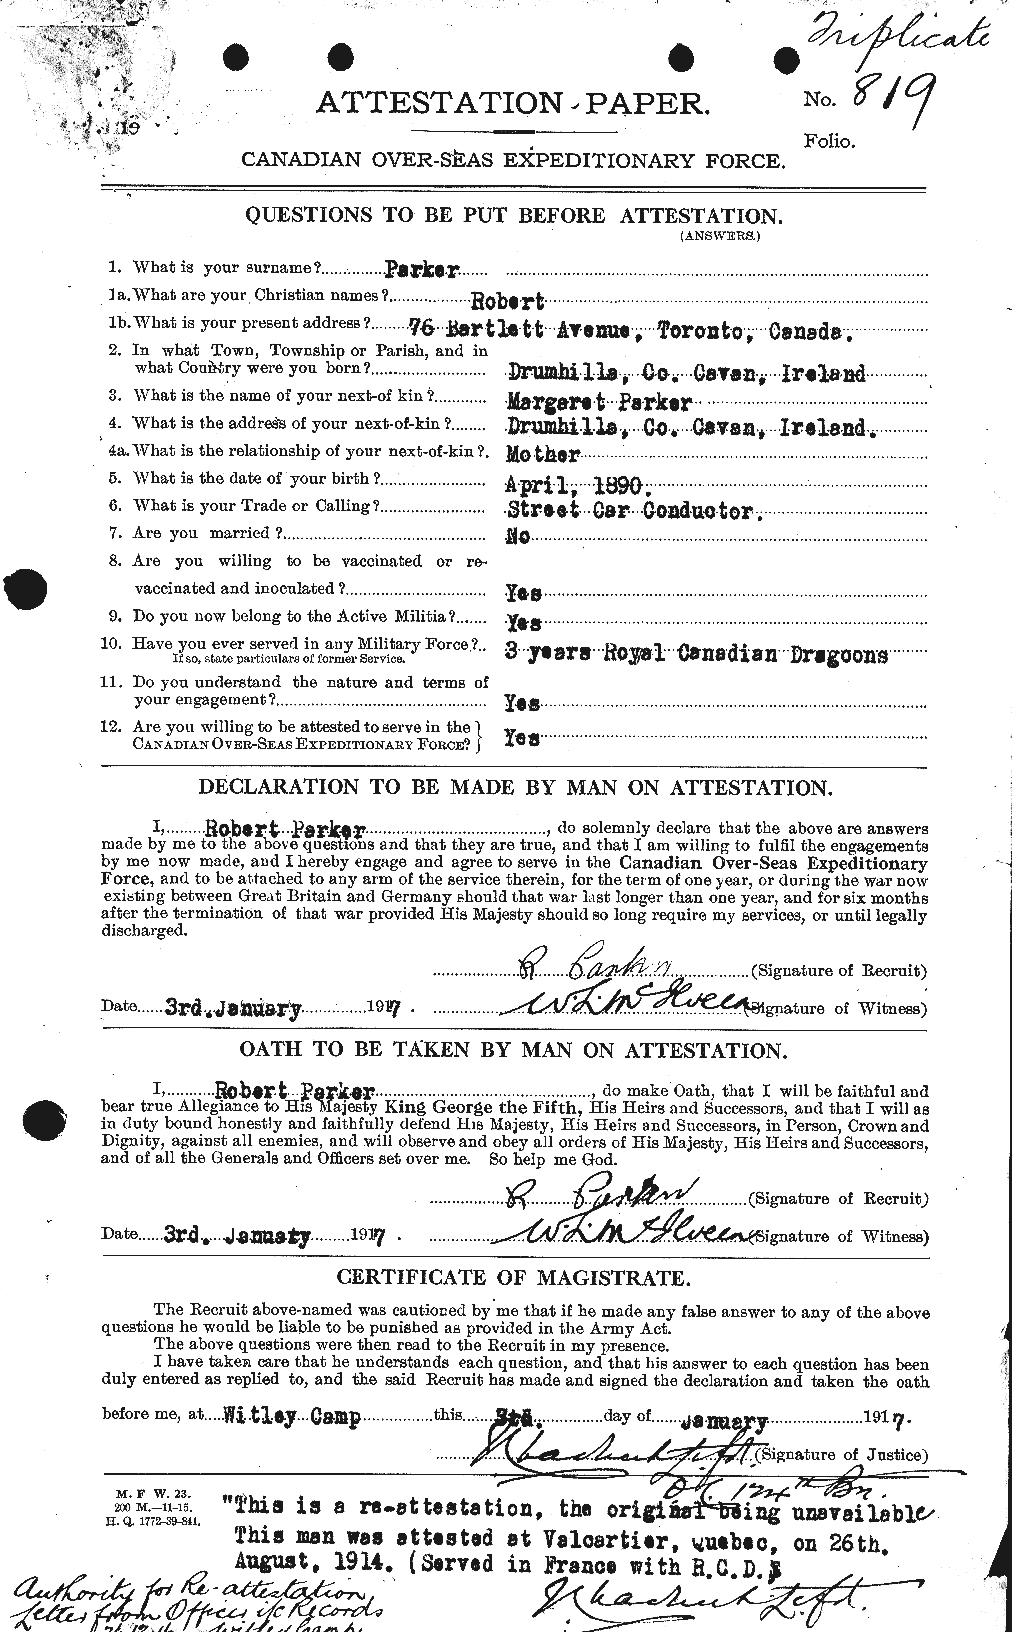 Personnel Records of the First World War - CEF 565593a